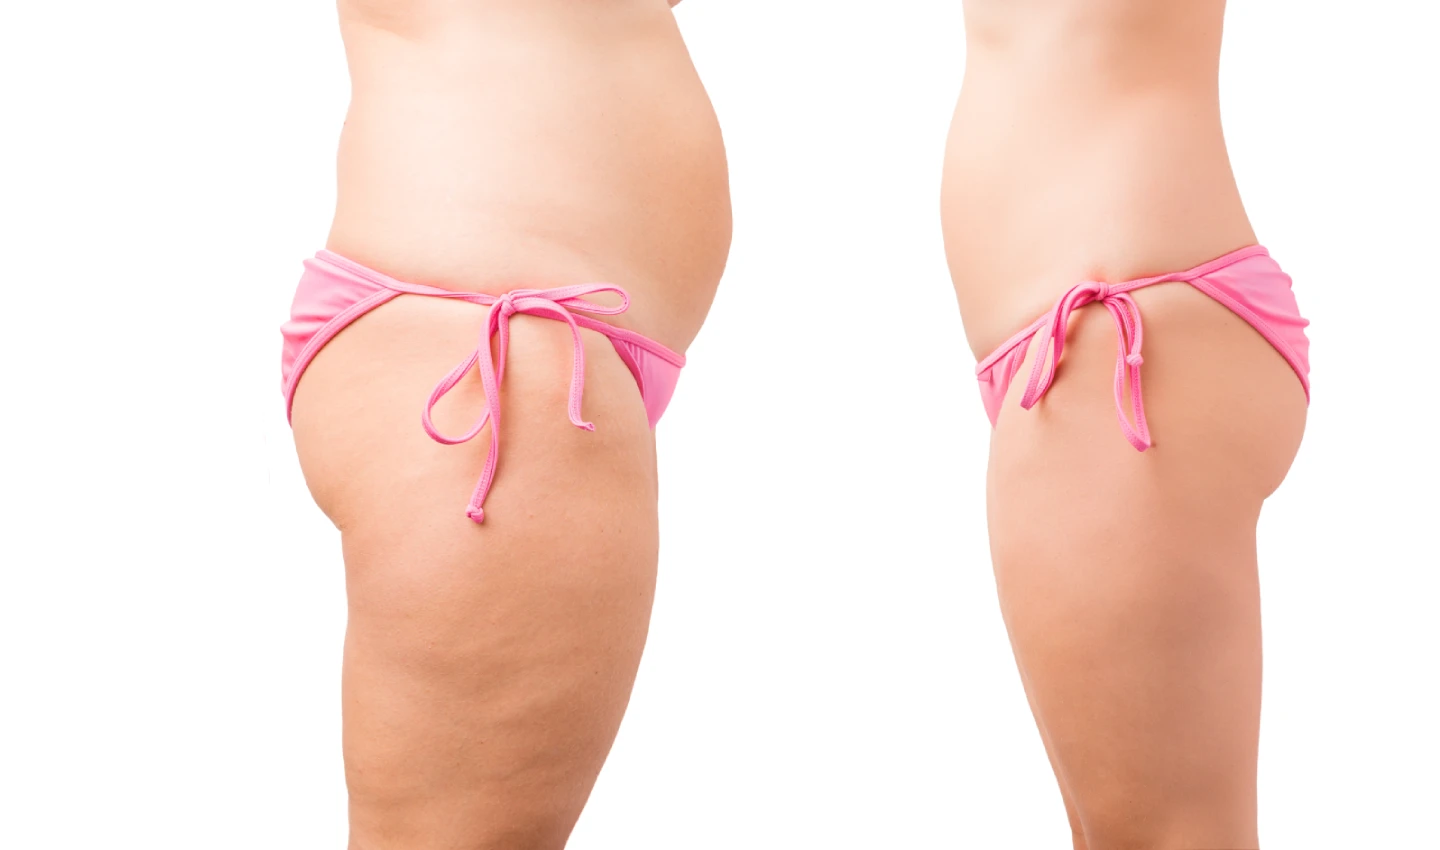 Before and After Photos of Liposuction Surgery on a Mature Woman - witness the stunning transformation with these Liposuction Surgery Photos showcasing the effects of removing excess fat to create a more sculpted and toned physique.